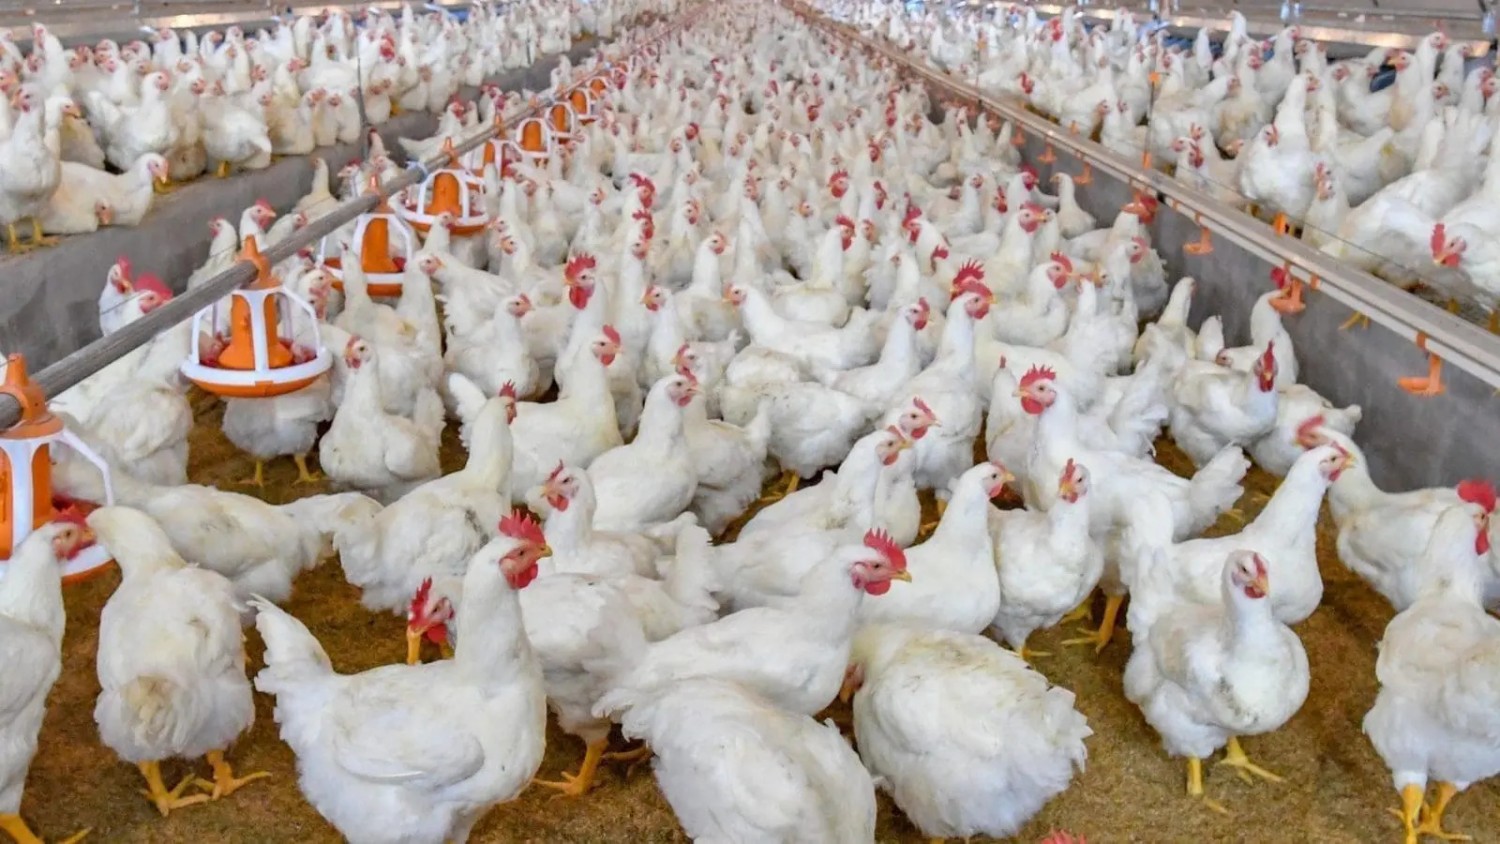 Competition Commission of SA to Conduct a Market Inquiry into the Poultry Industry Value Chain